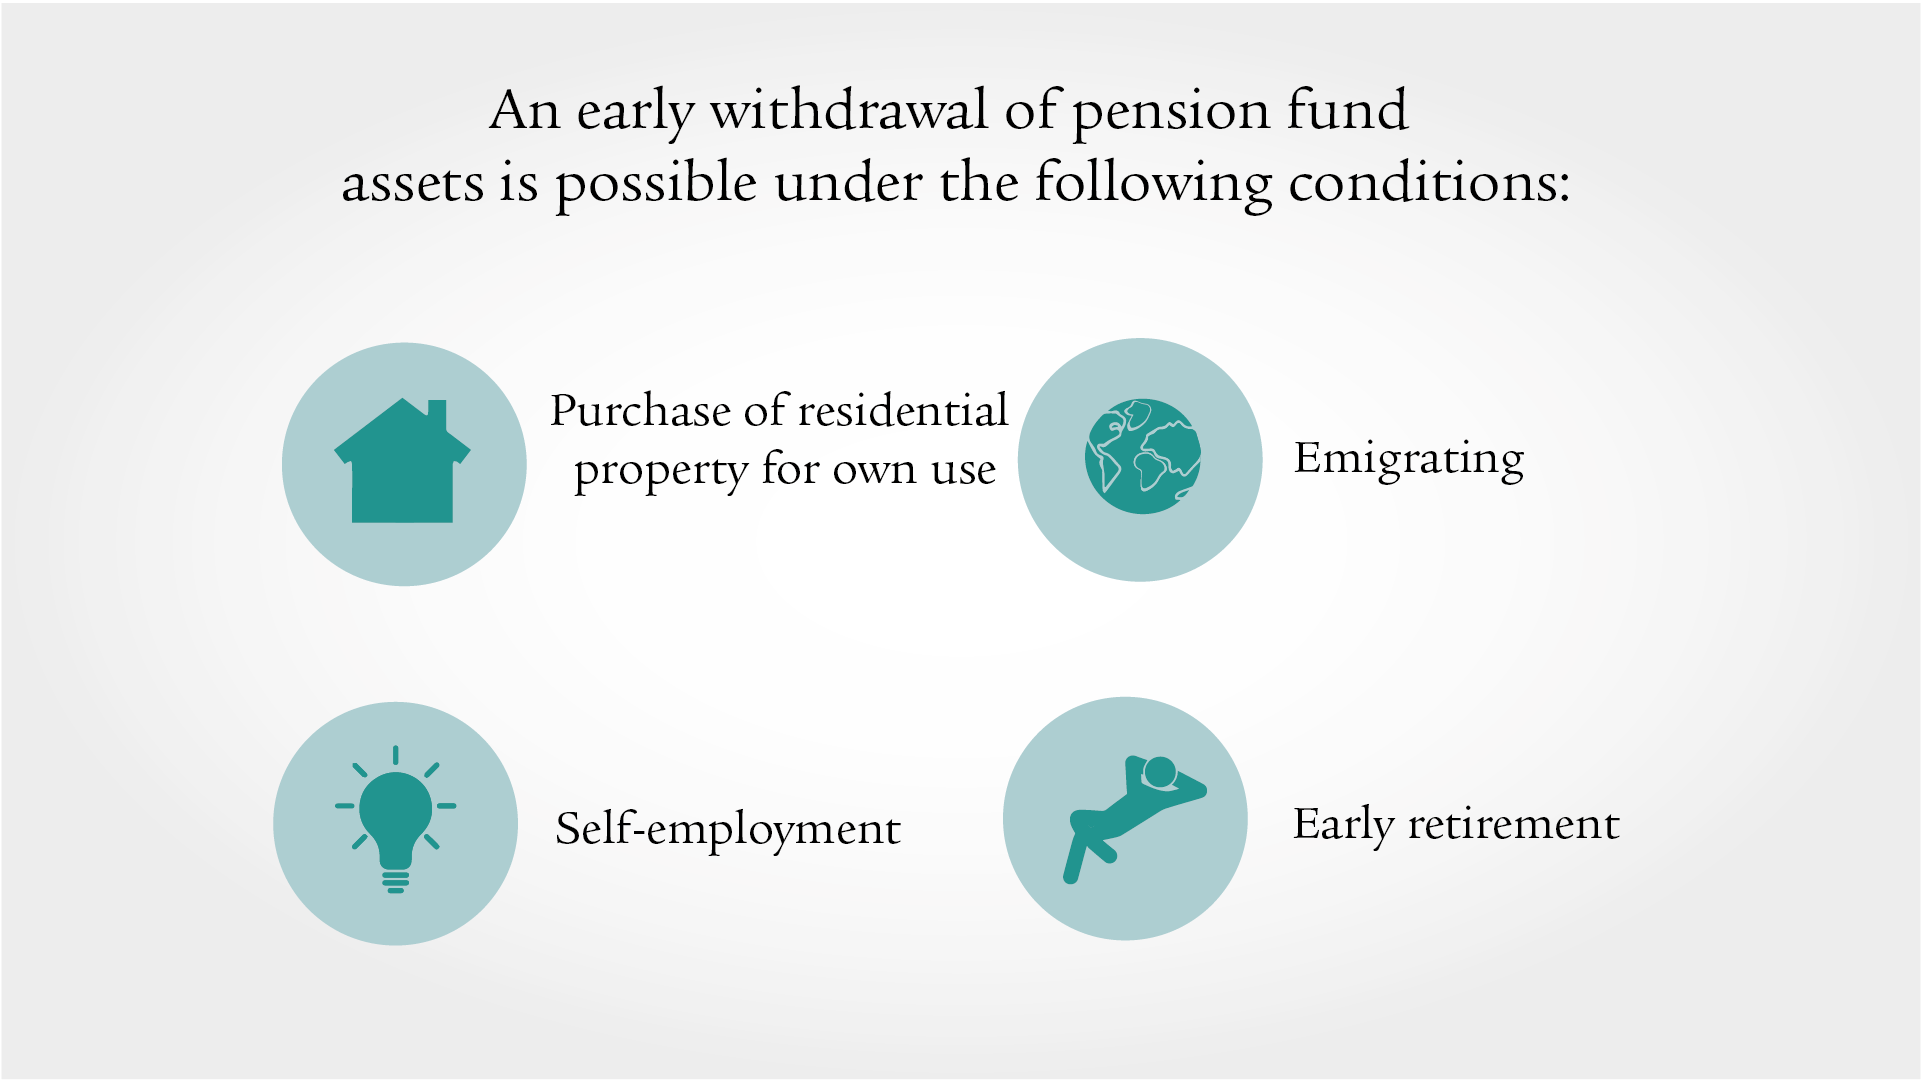 an early withdrawal of pension fund assets is possible under following conditions